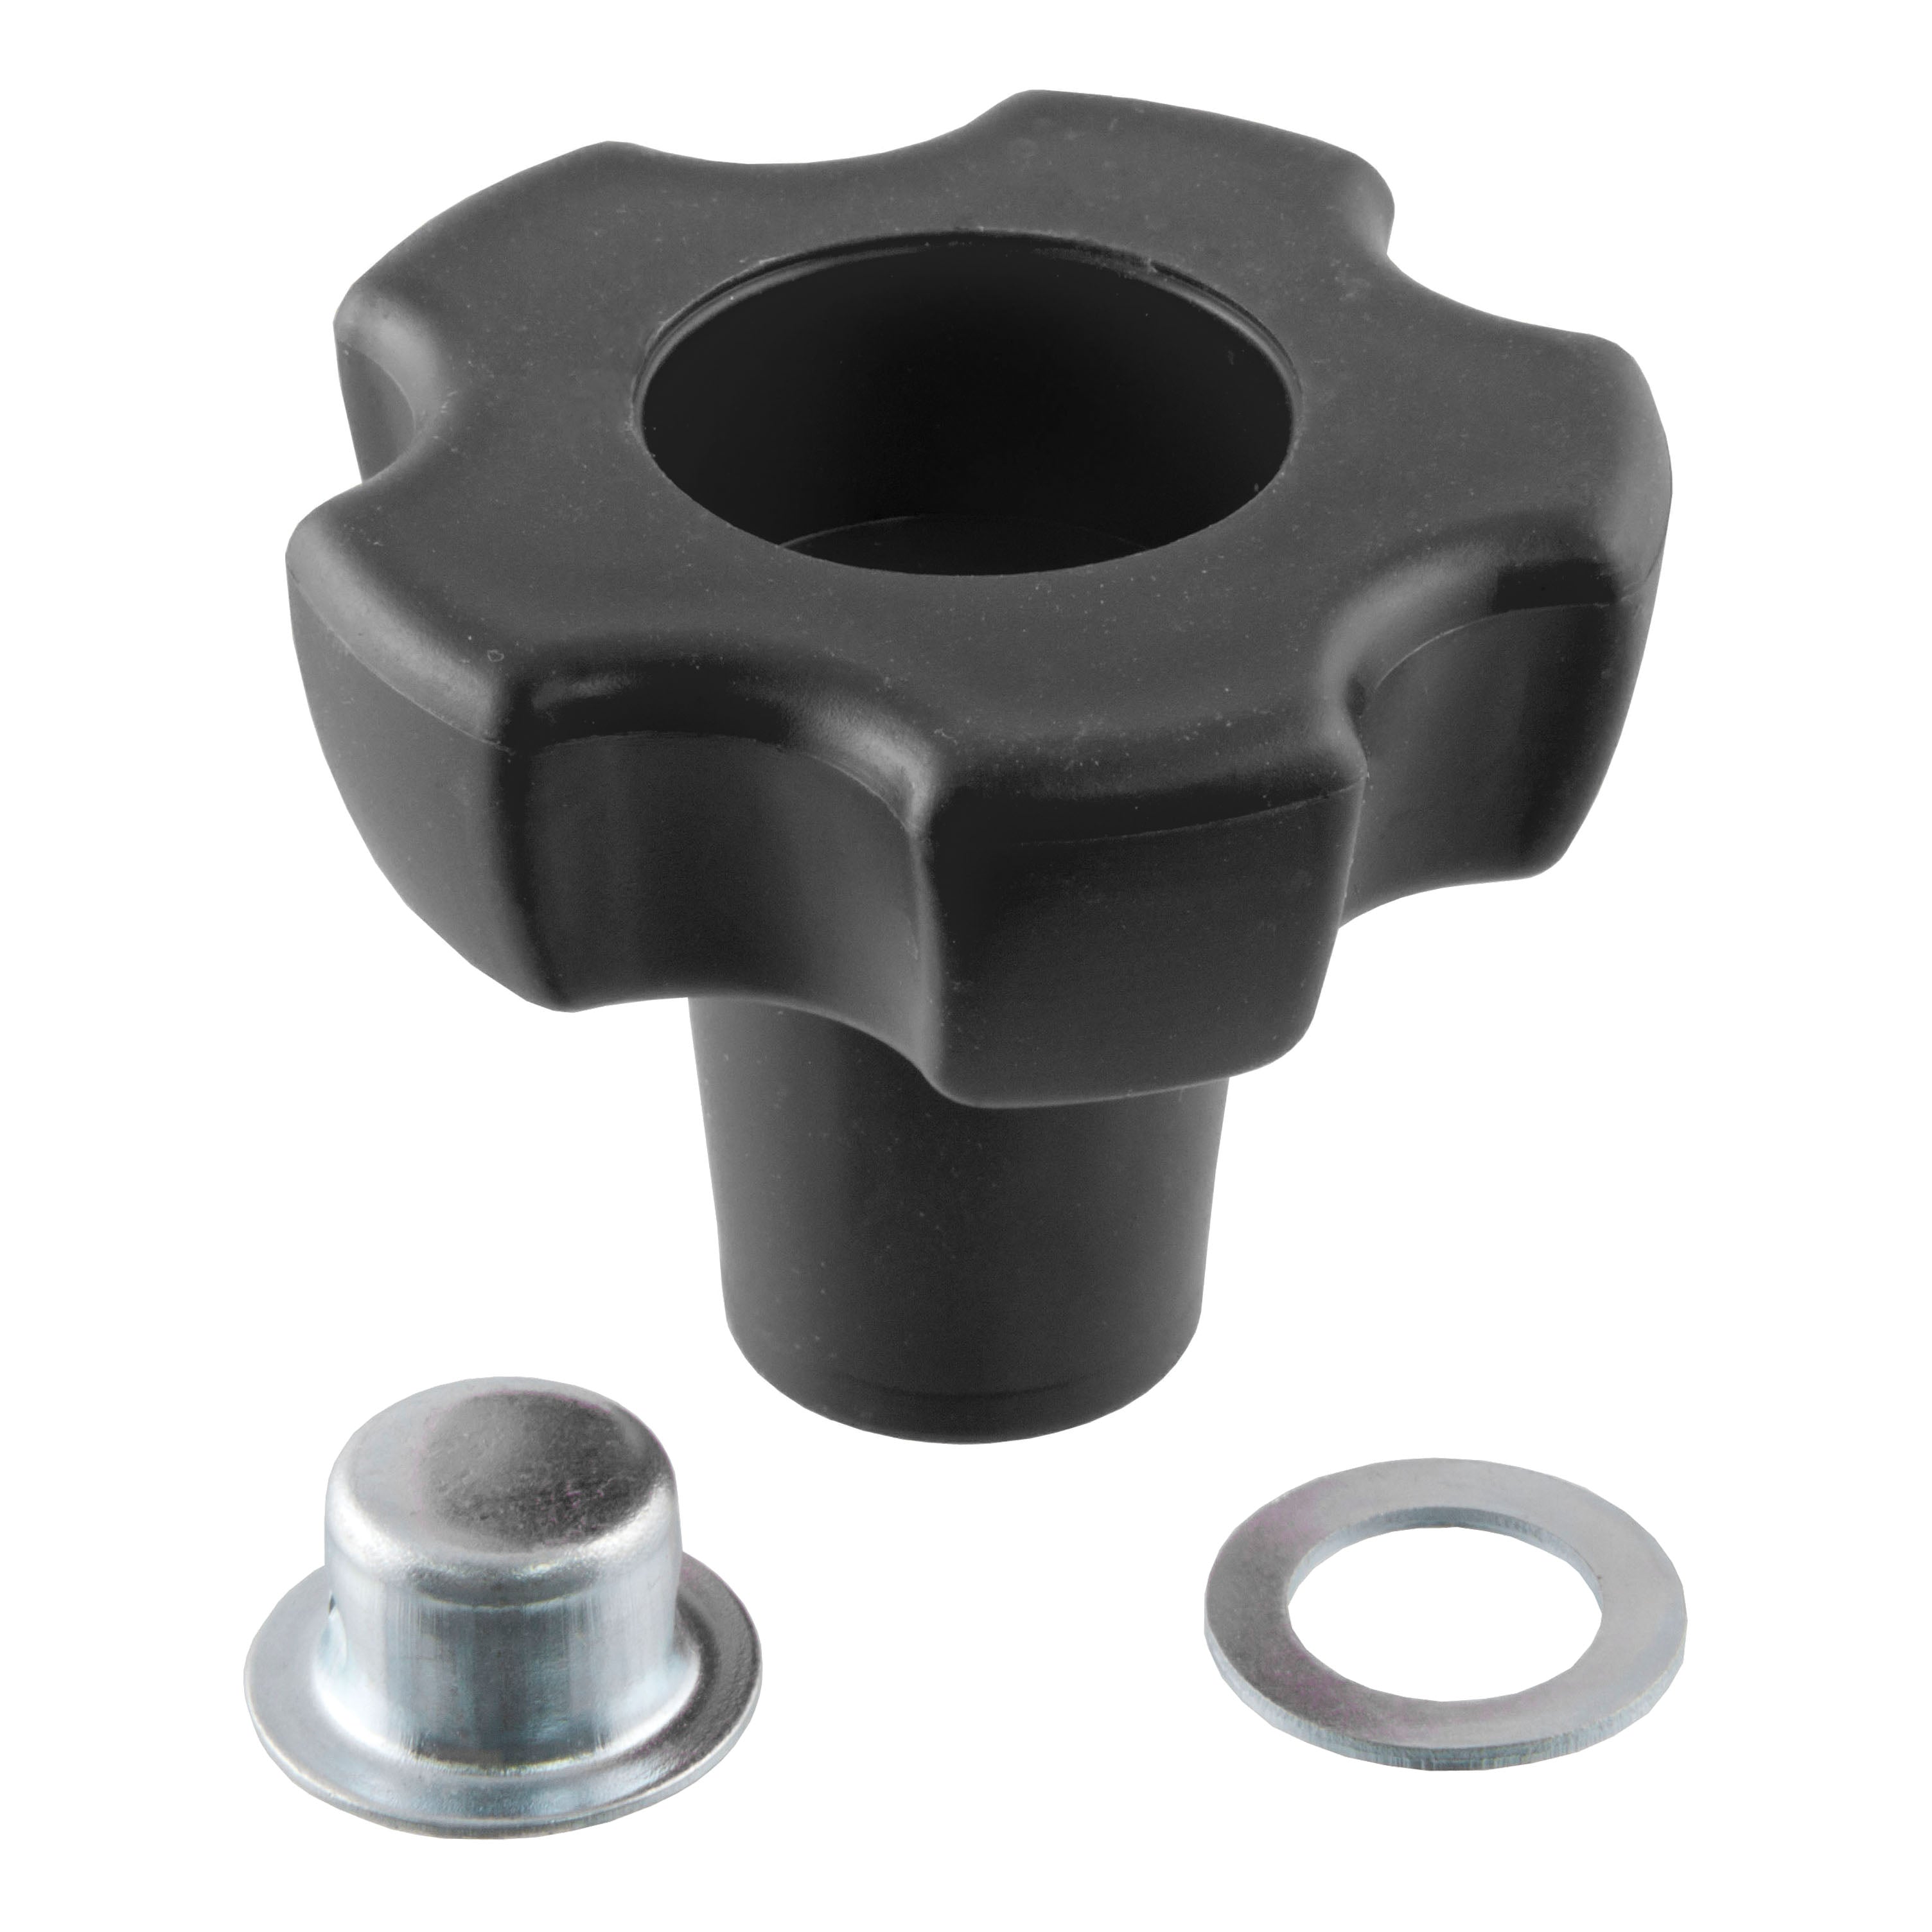 CURT 28927 CURT 28927 Replacement Jack Handle Knob for Top-Wind Jacks - Truck Part Superstore